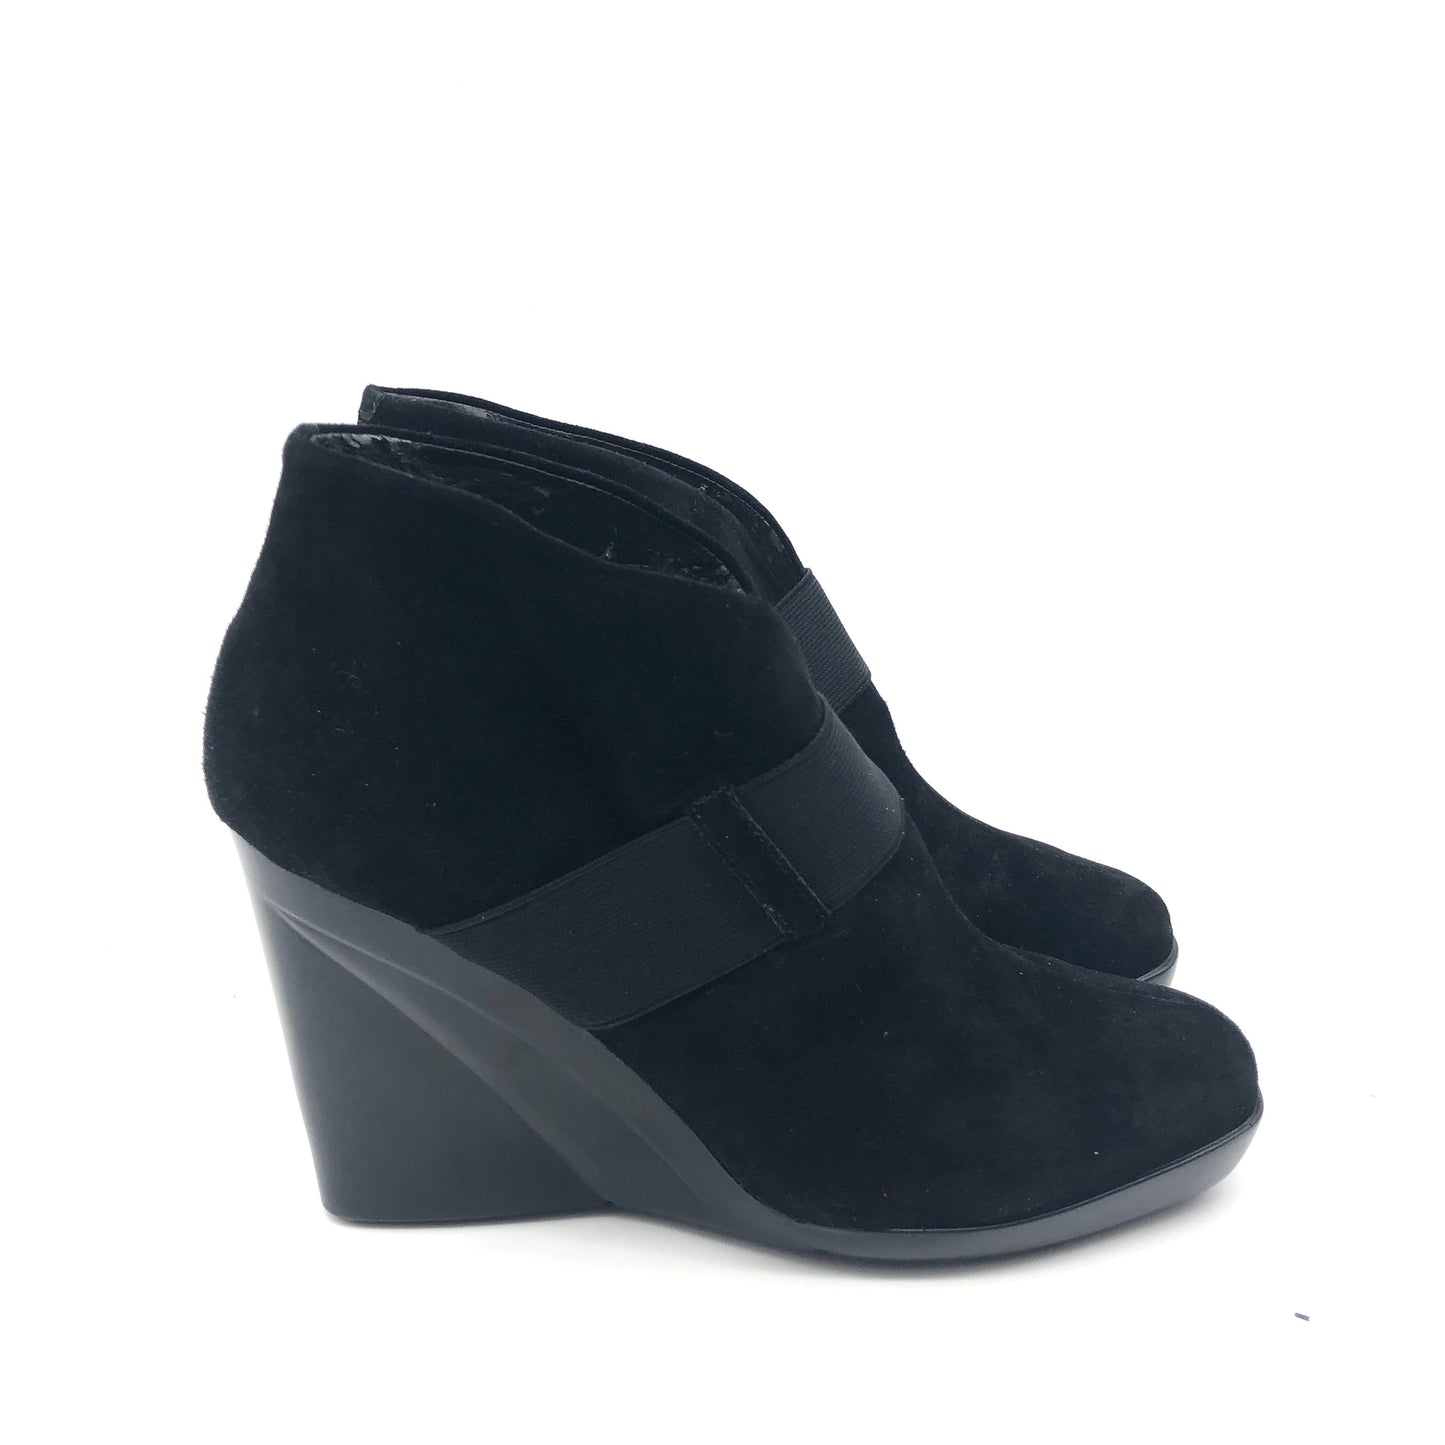 Shoes Heels Wedge By Nine West  Size: 9